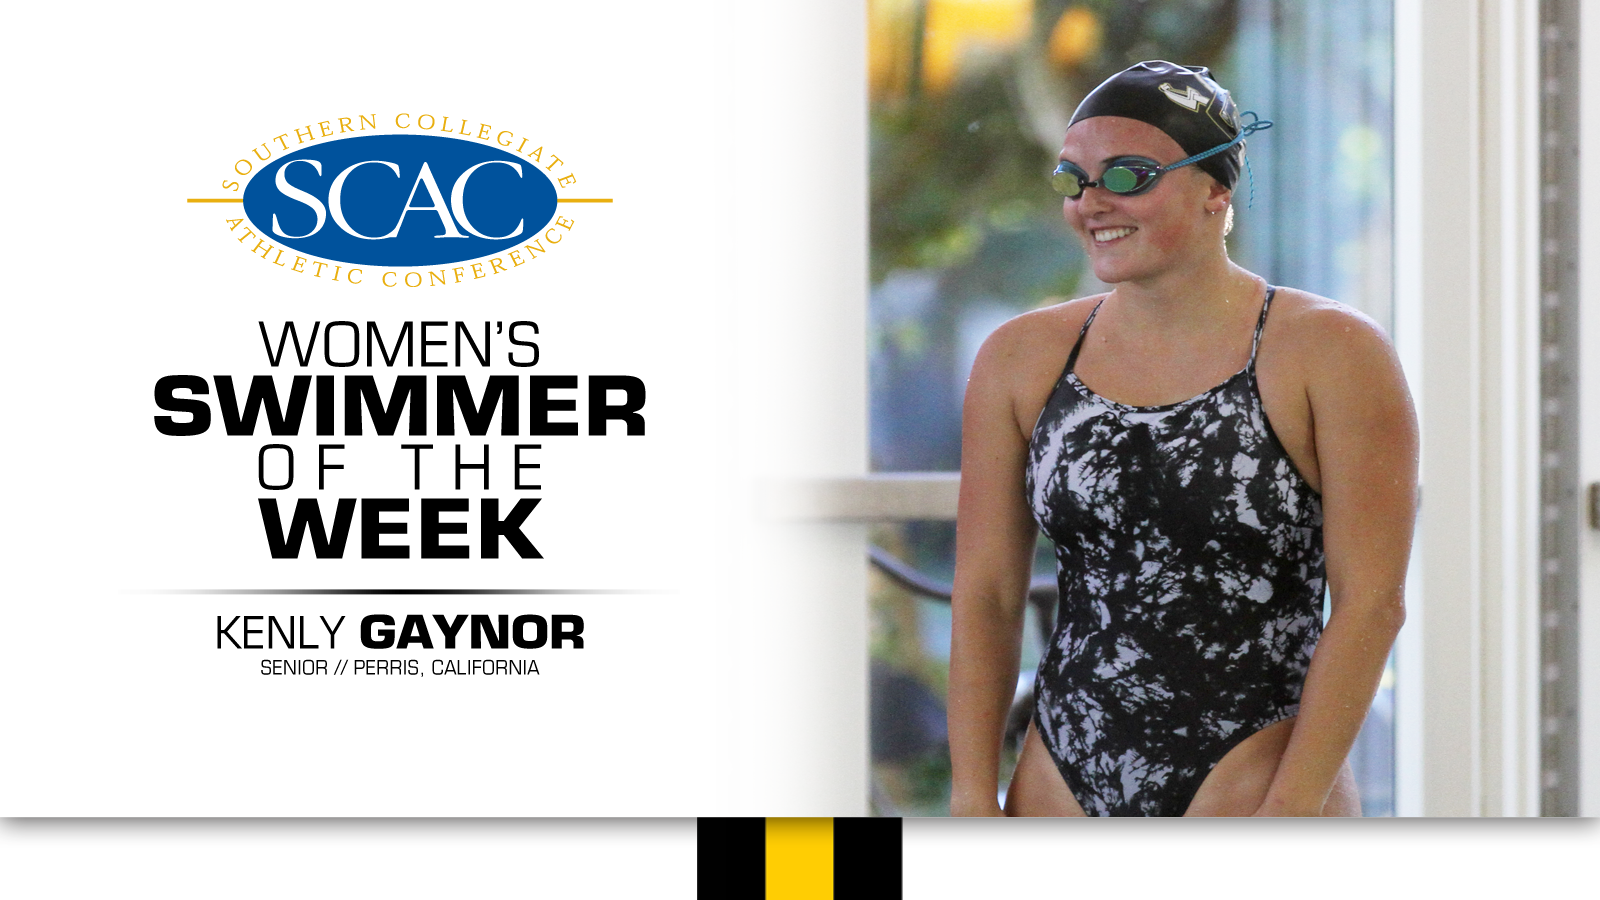 Gaynor tabbed SCAC Women's Swimmer of the Week